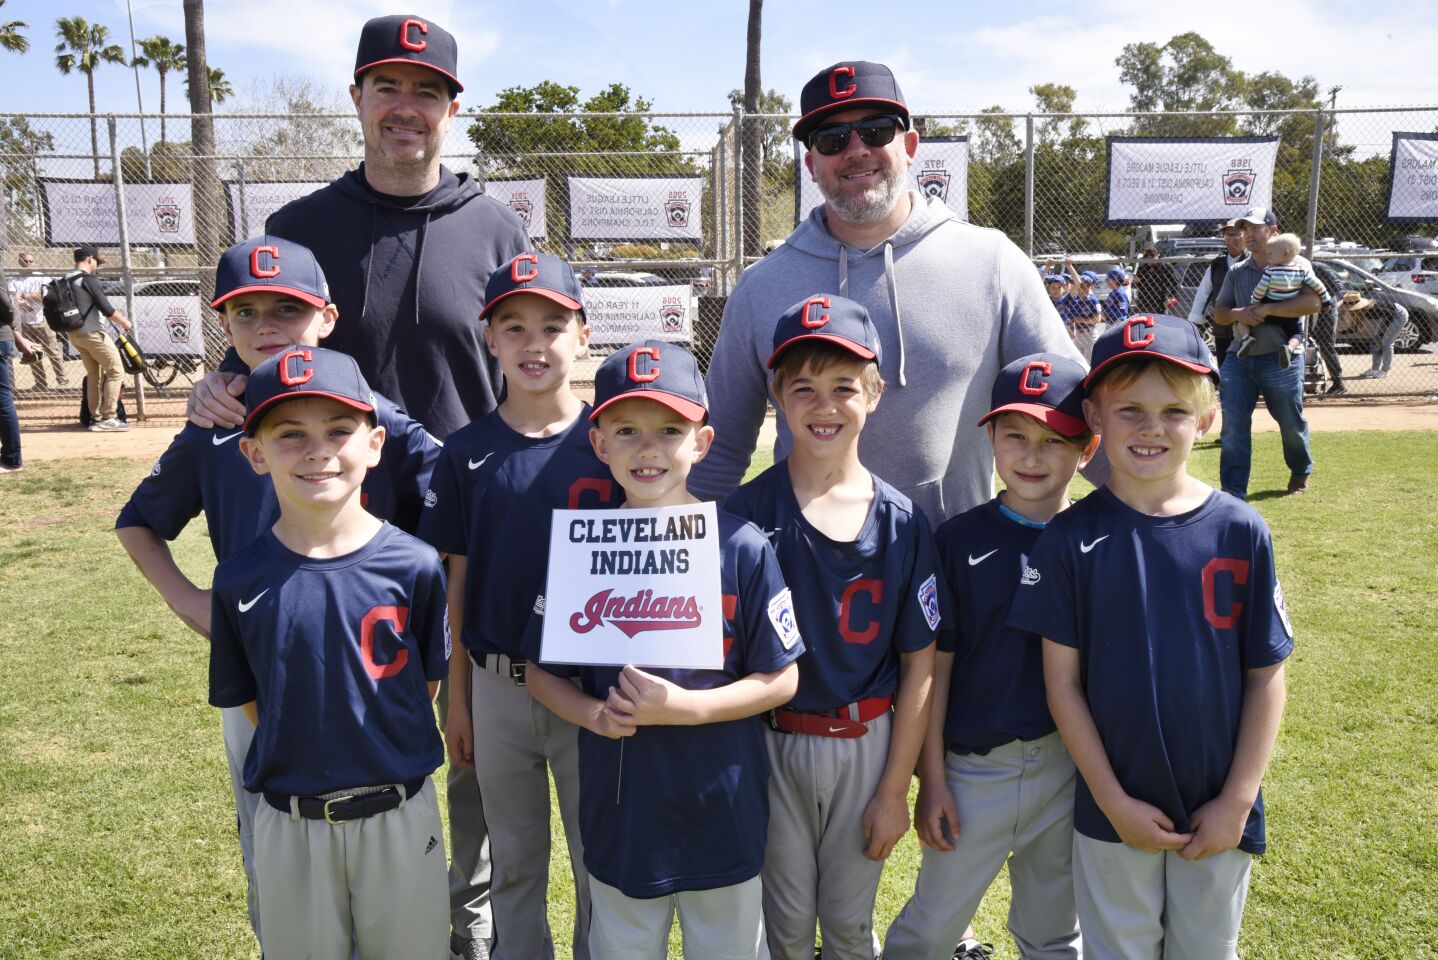 Minor B Cleveland Indians, with Coaches Bob Heydet and Bret Sheffield